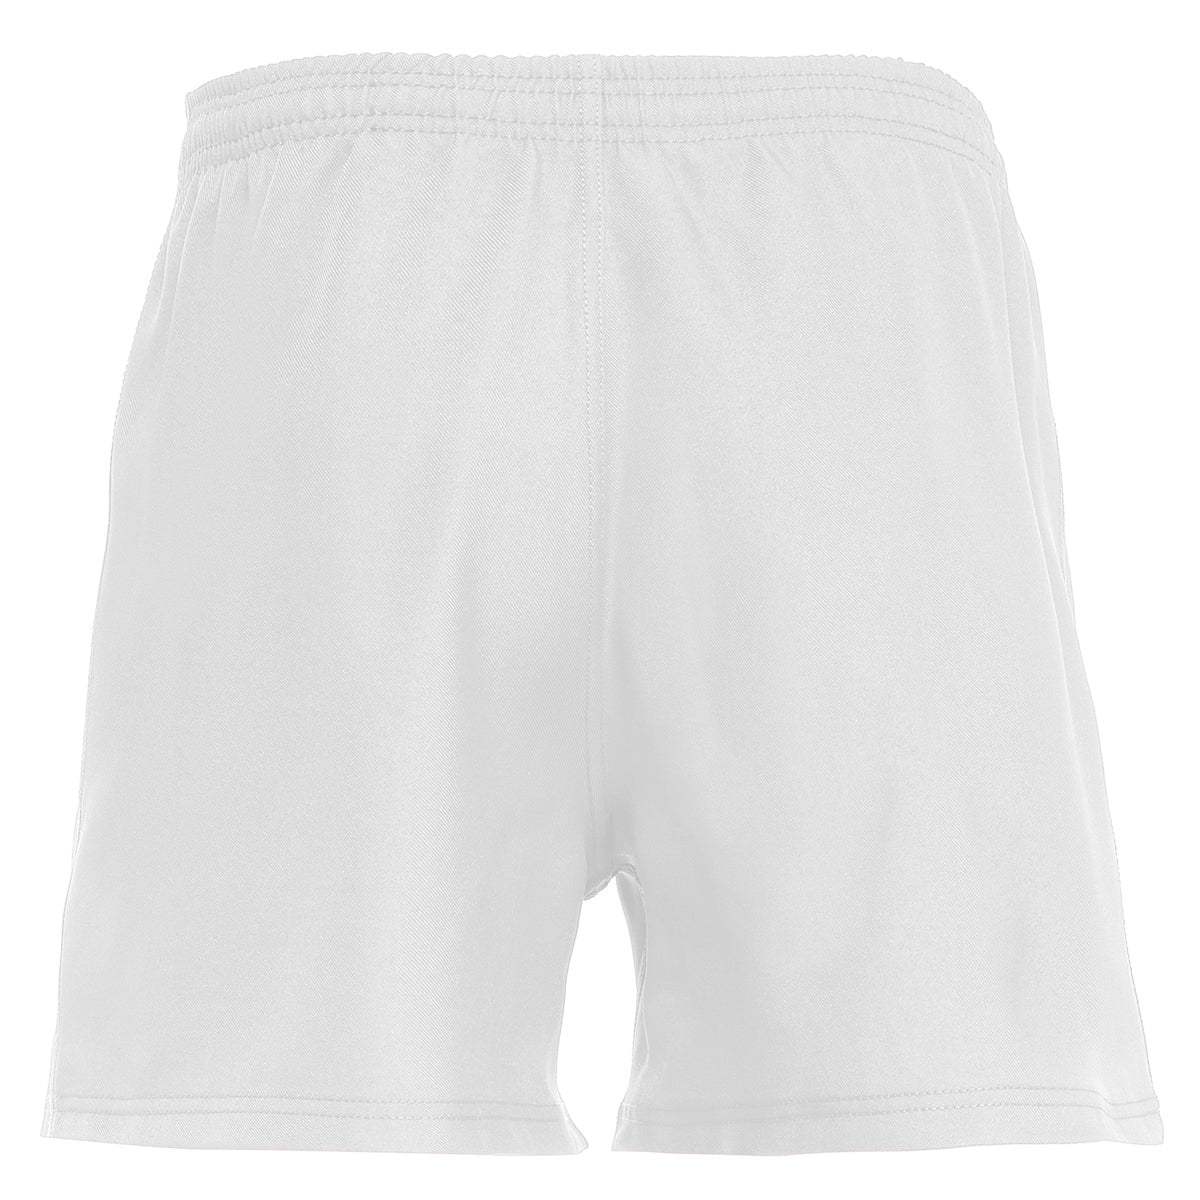 Rockwell College Macron Rugby Shorts